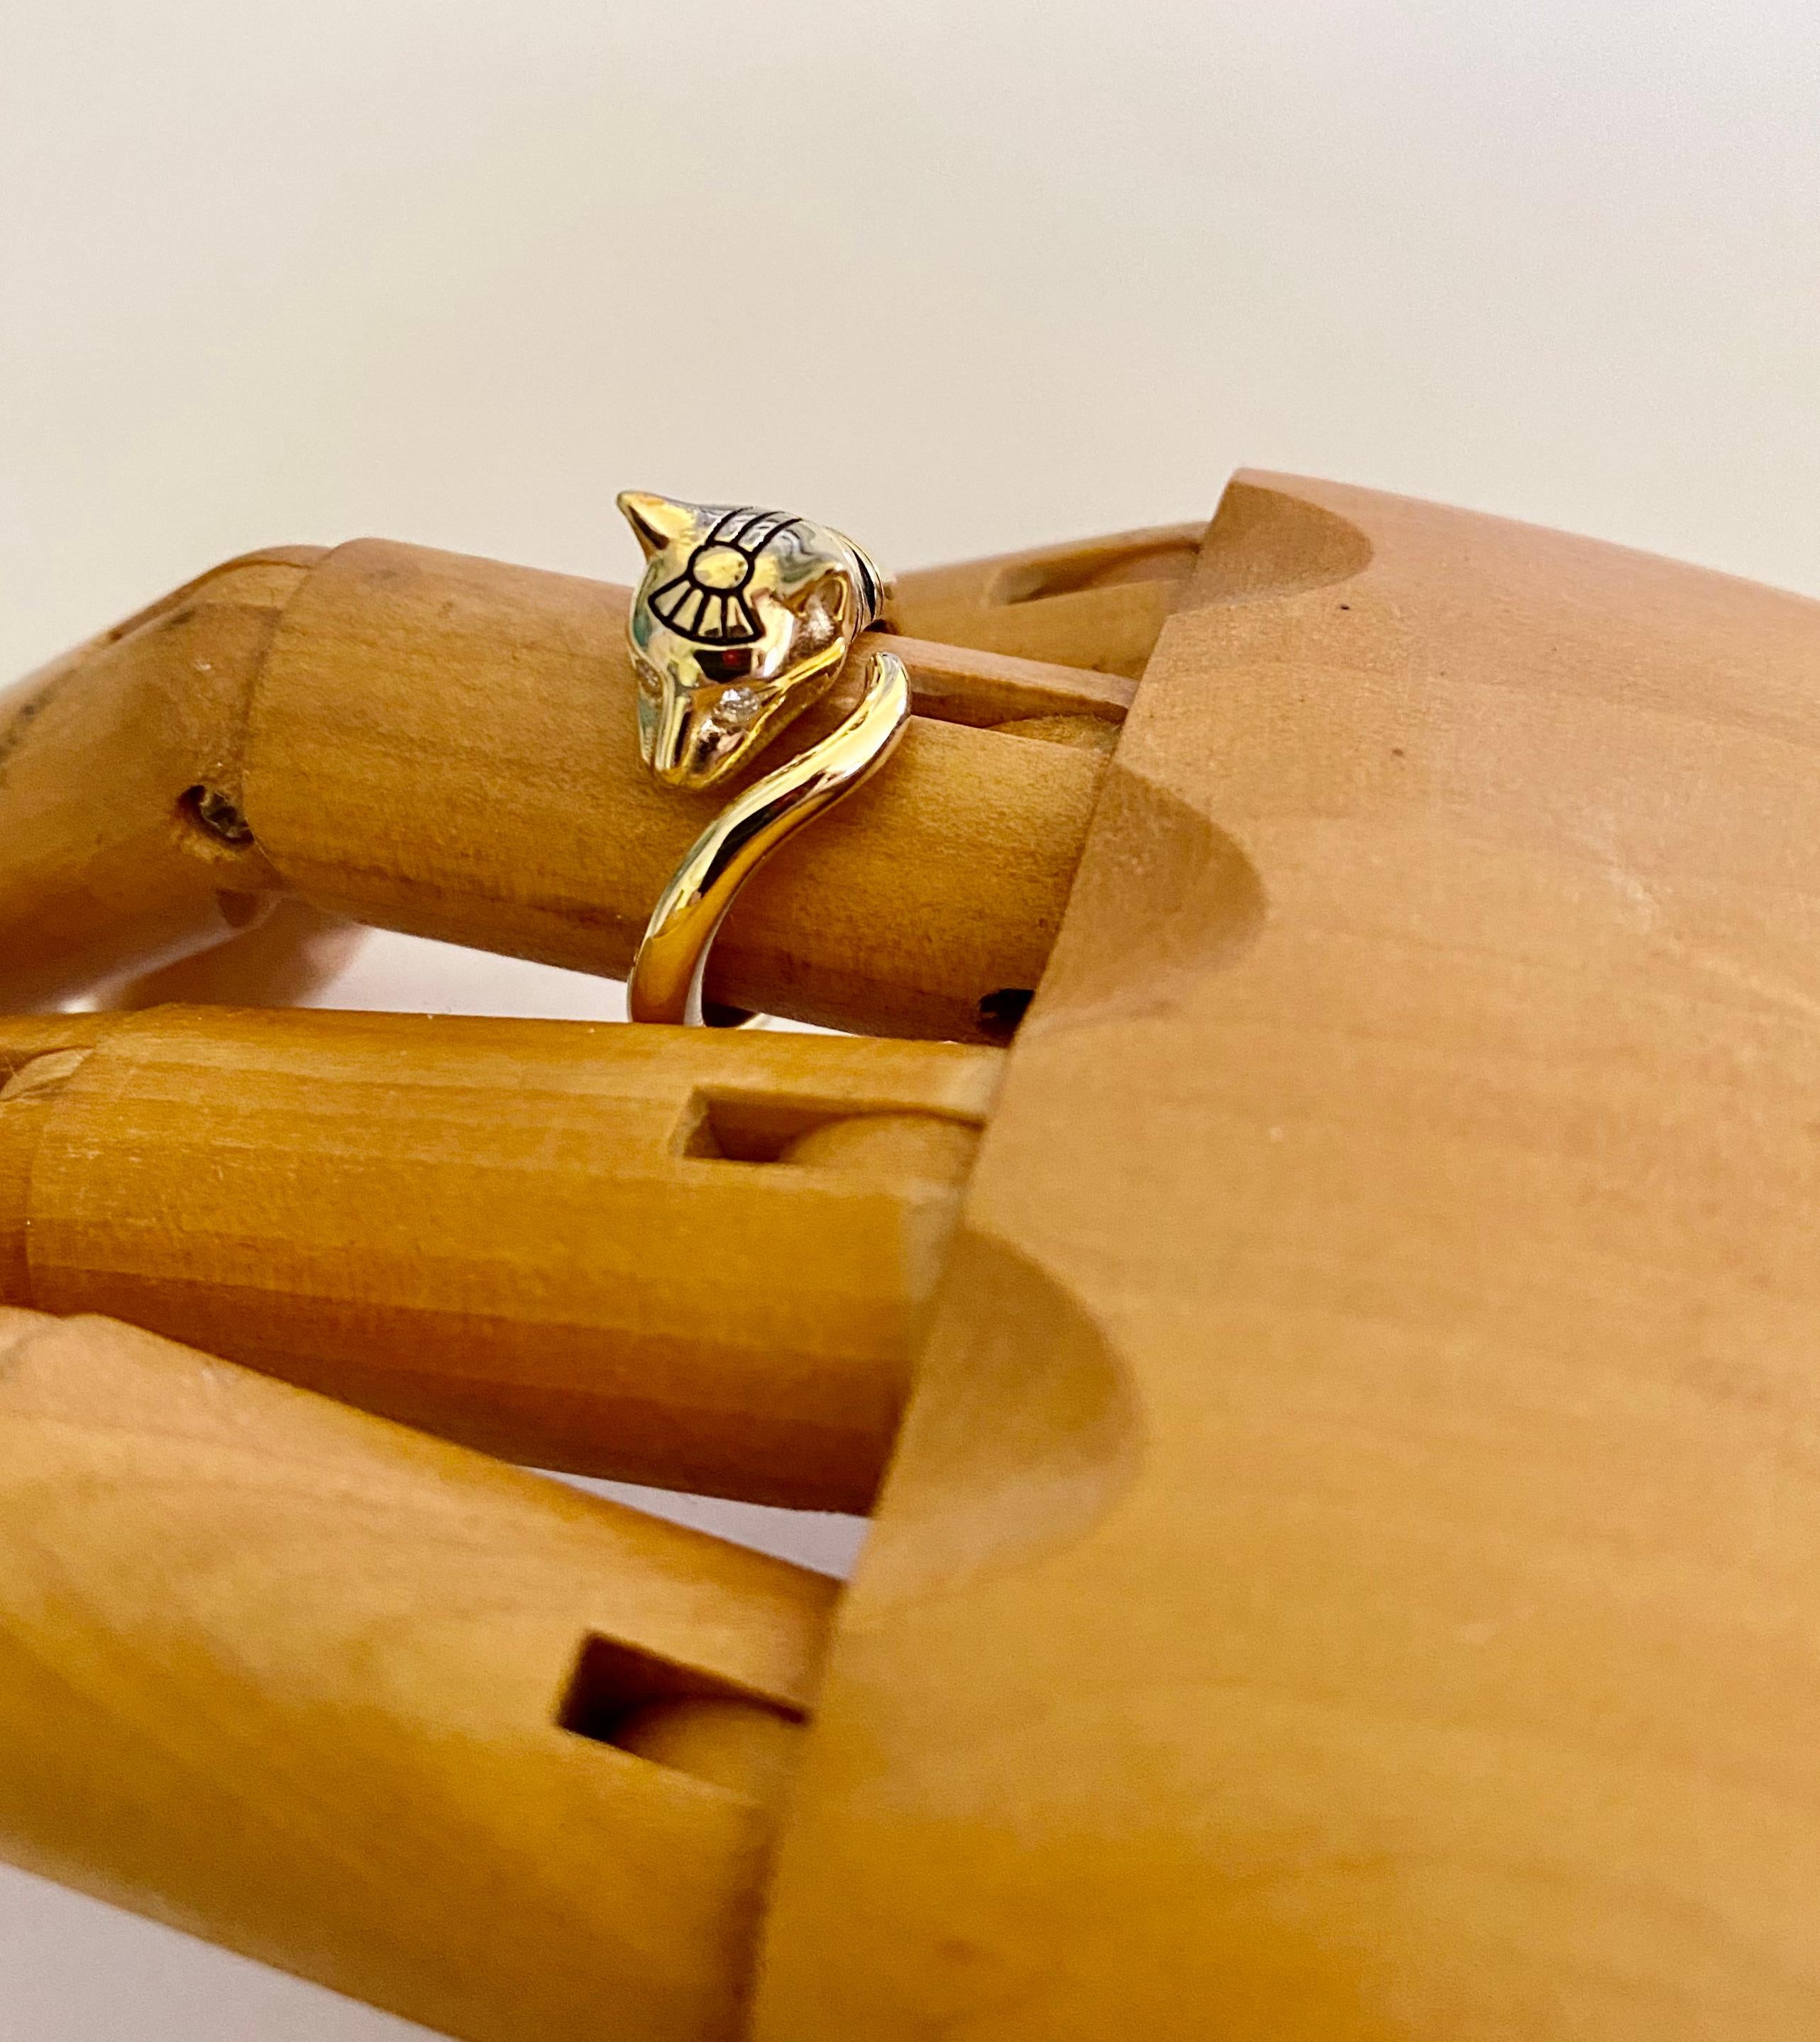 Egyptian Revival cat ring.  Bastet, also known a Bast, is the fierce Egyptian goddess worshiped in the form of a lion and later, after its domestication, a cat.  This 18k yellow gold wearable sculpture has diamond eyes.  The engraving is highlighted